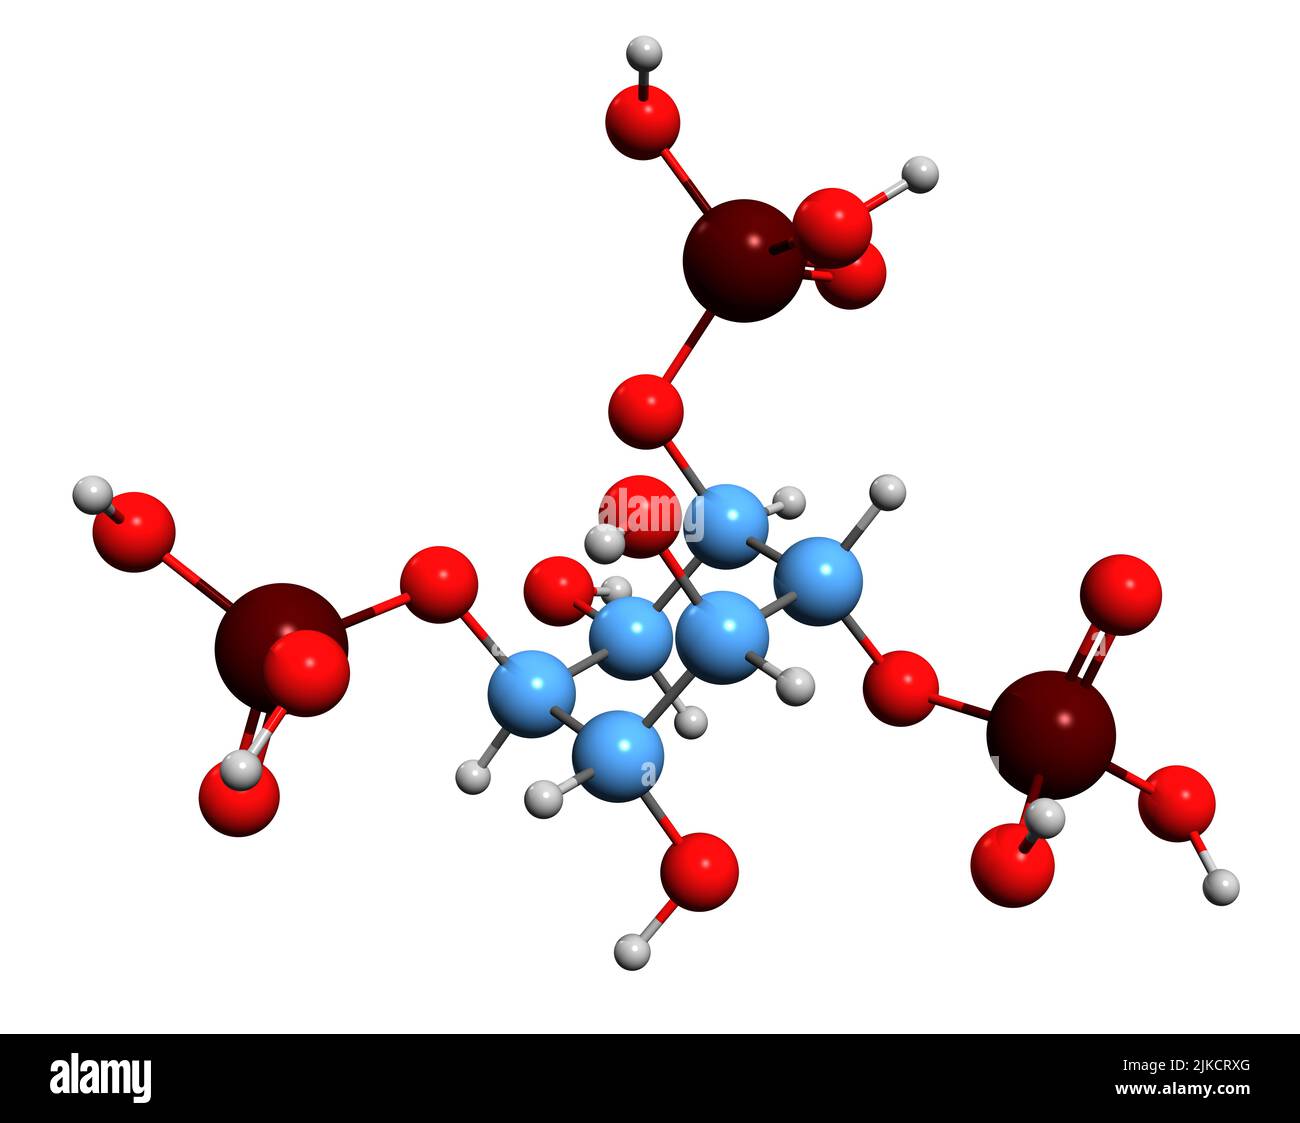 3D image of Inositol trisphosphate skeletal formula - molecular chemical structure of inositol phosphate signaling molecule isolated on white backgro Stock Photo